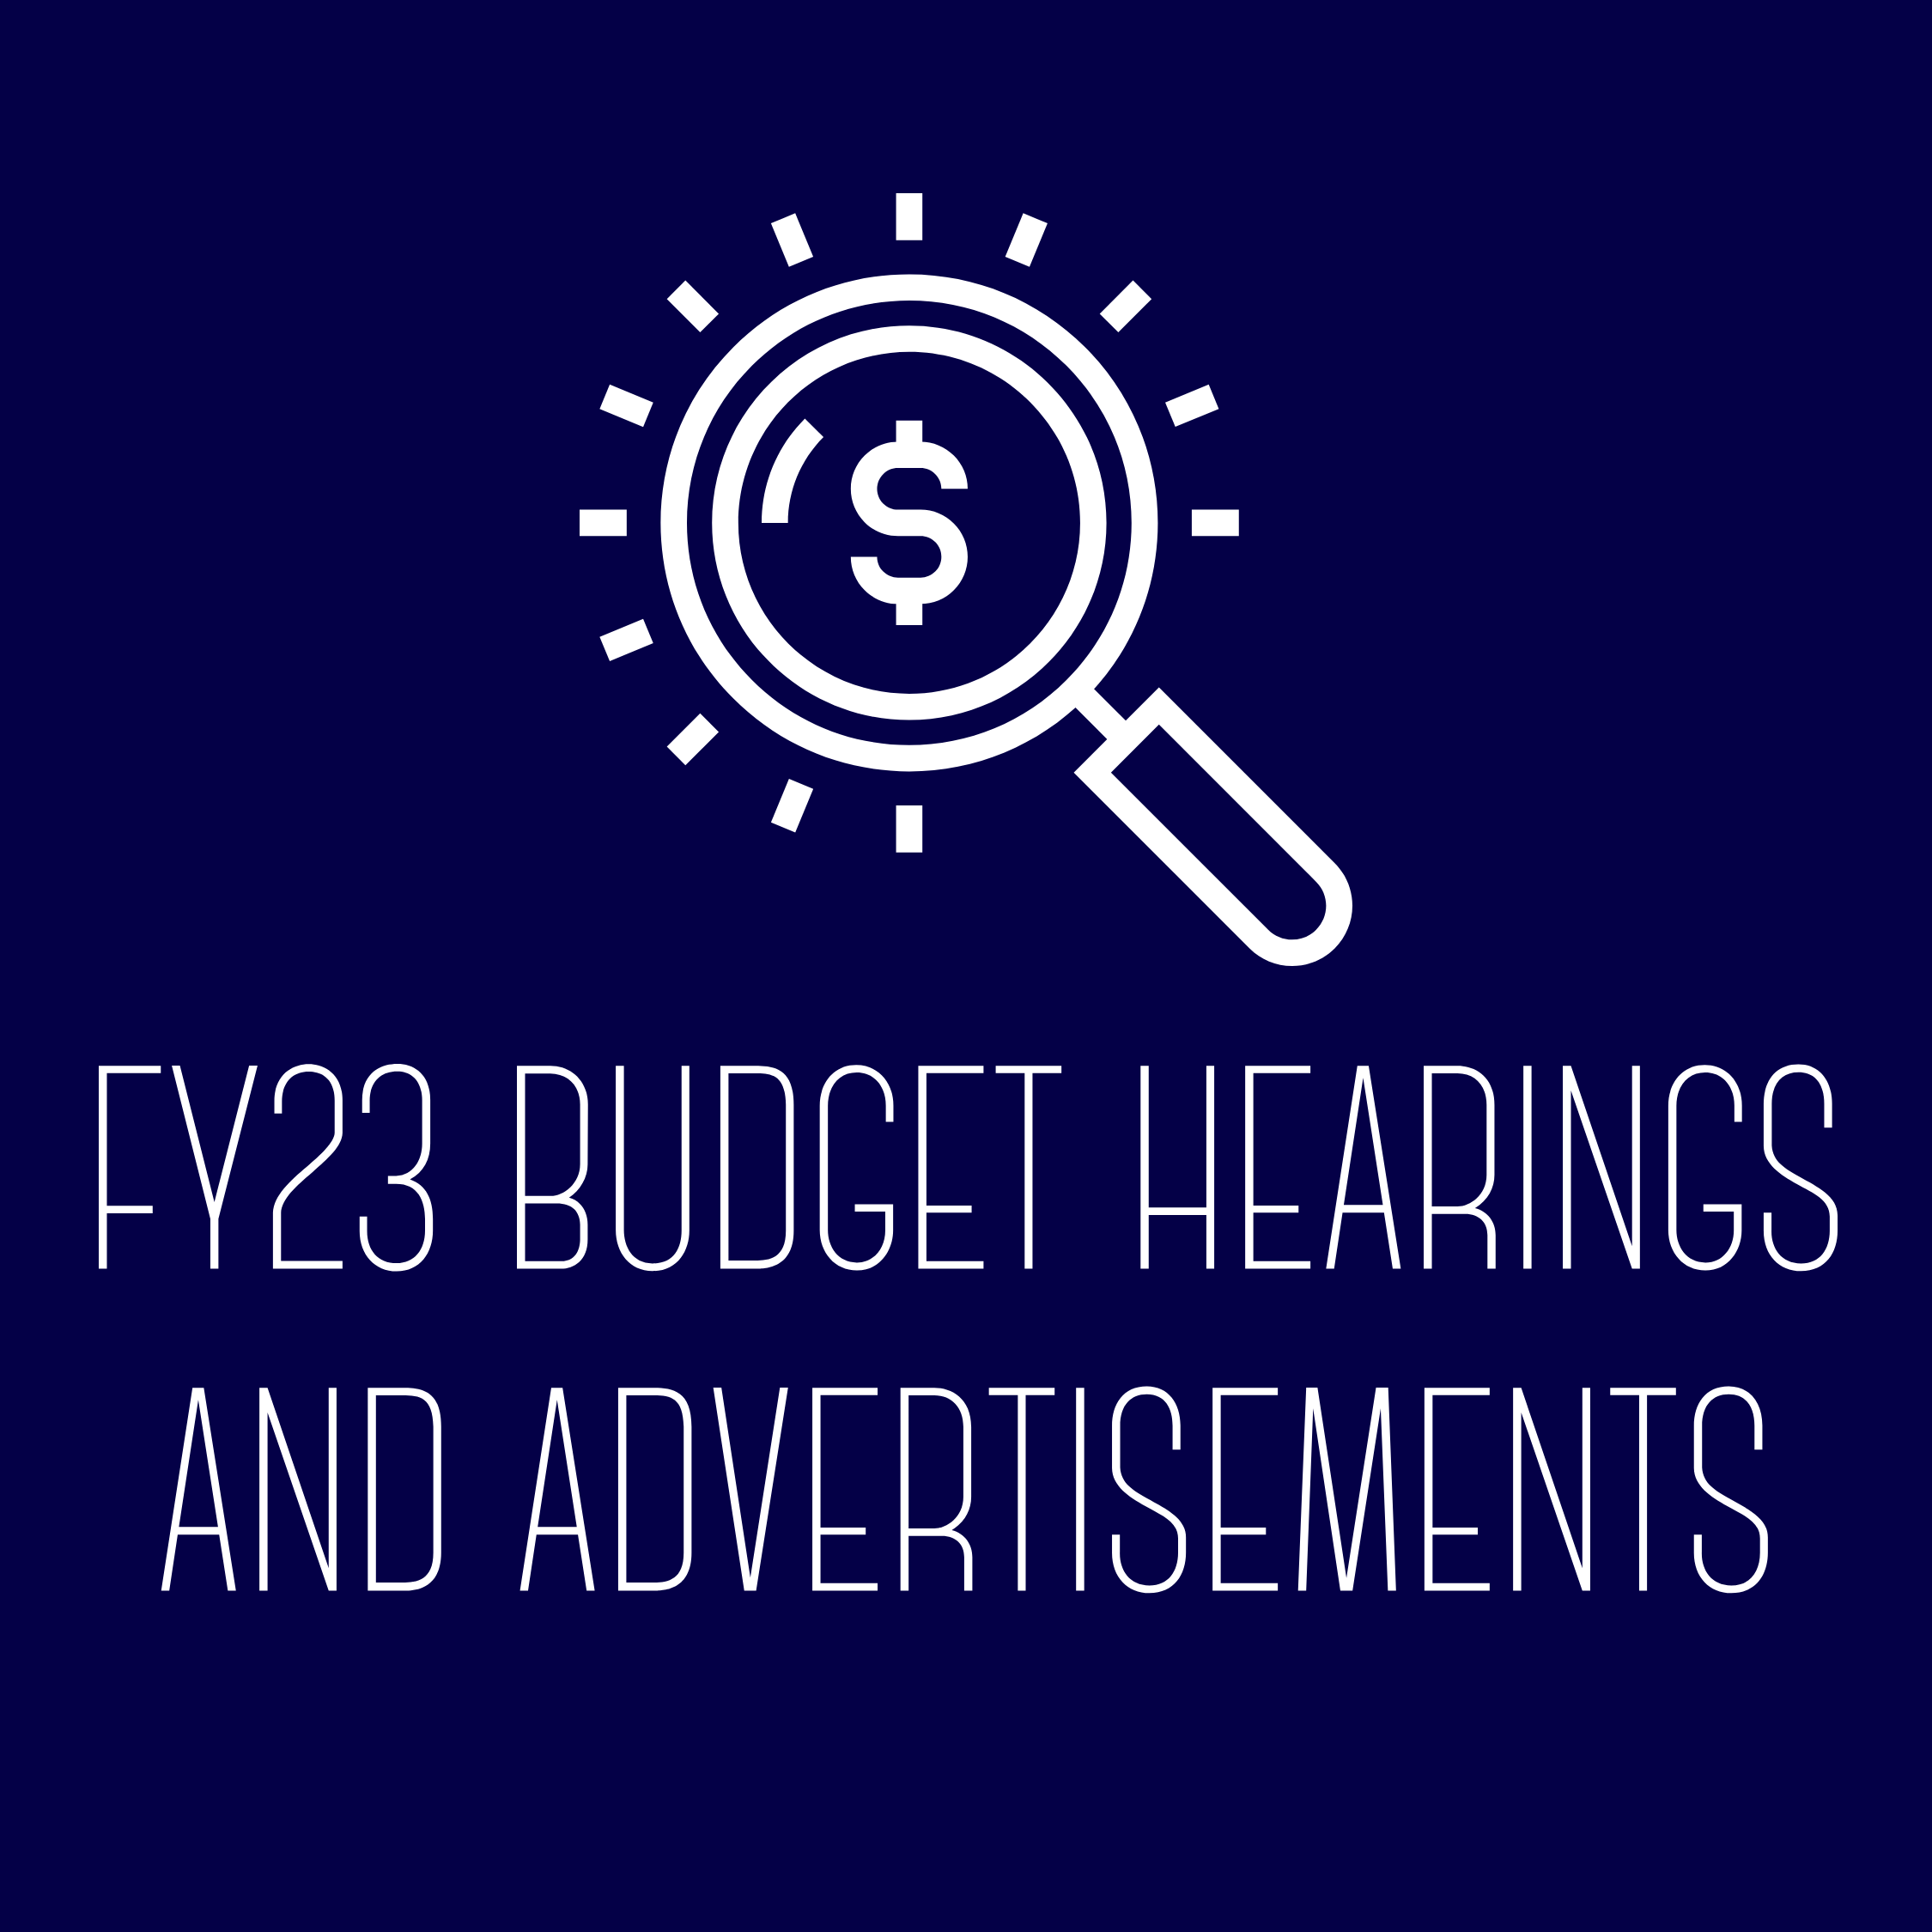 Budget Hearings and Advertisements